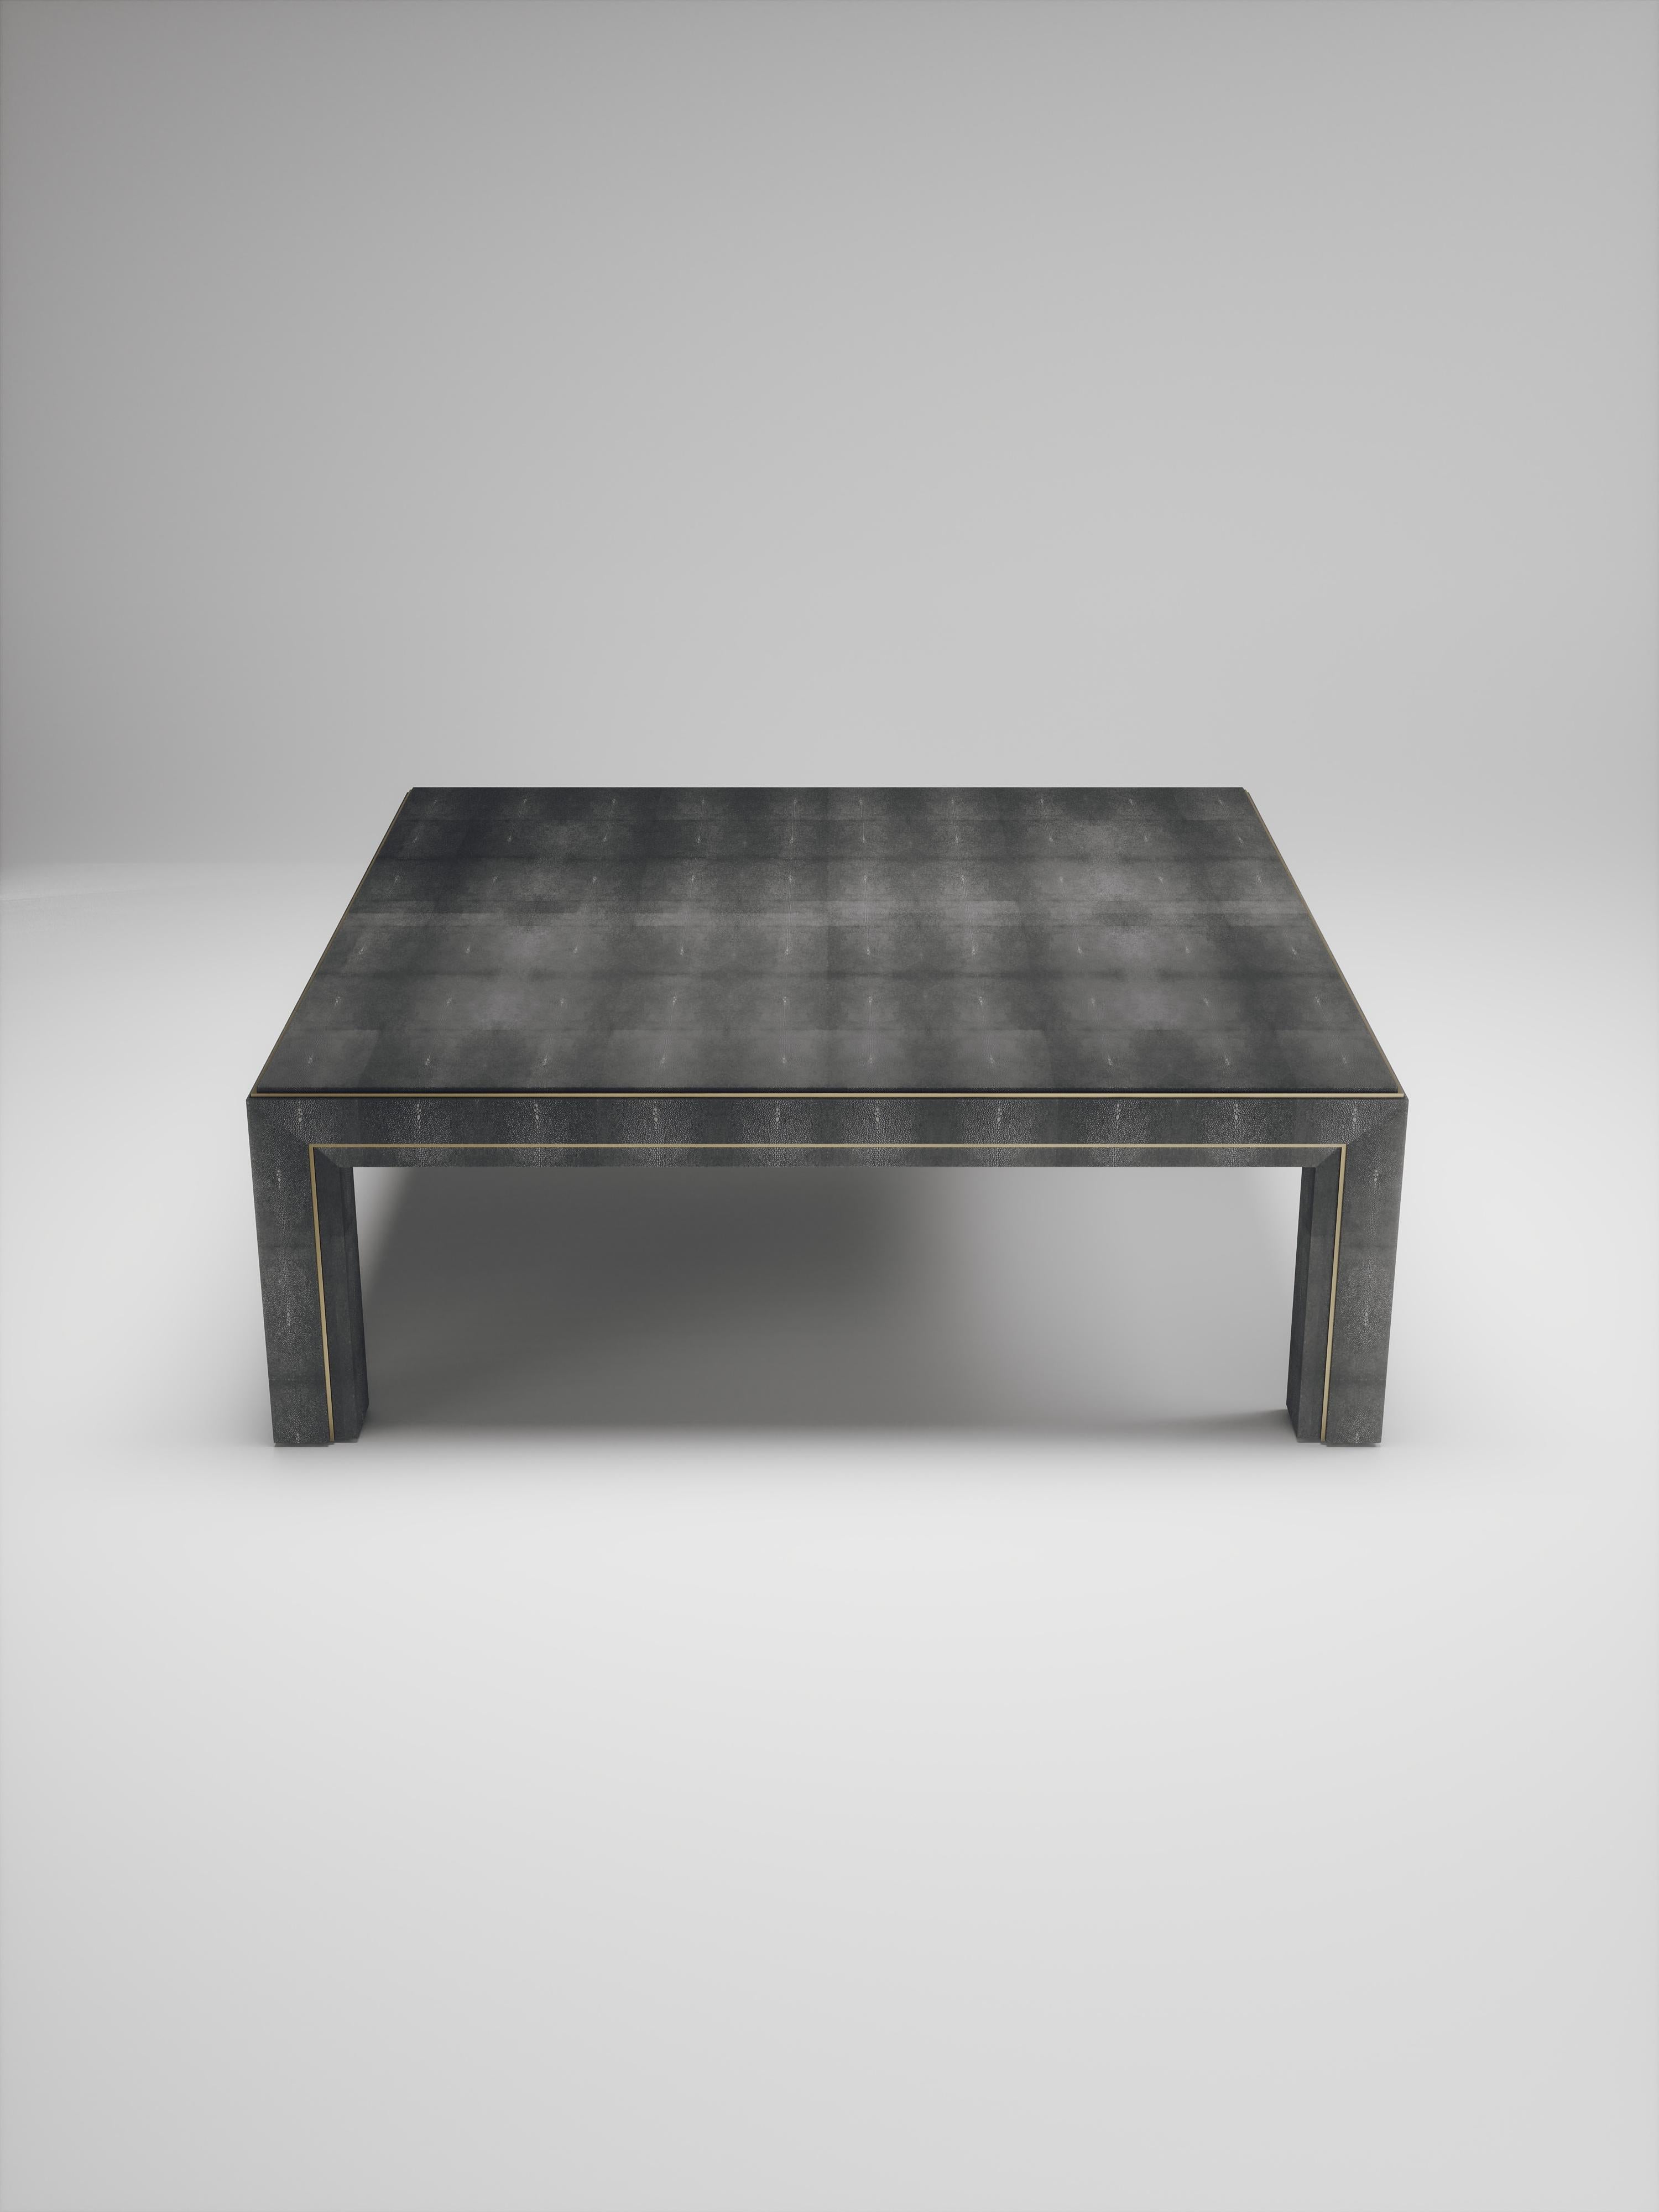 The parsons coffee table by R&Y Augousti is classic and elegant staple piece for your home. The clean lines of the overall piece, inlaid in coal black shagreen, are accentuated by the discreet bronze-patina brass indentation detail giving it a